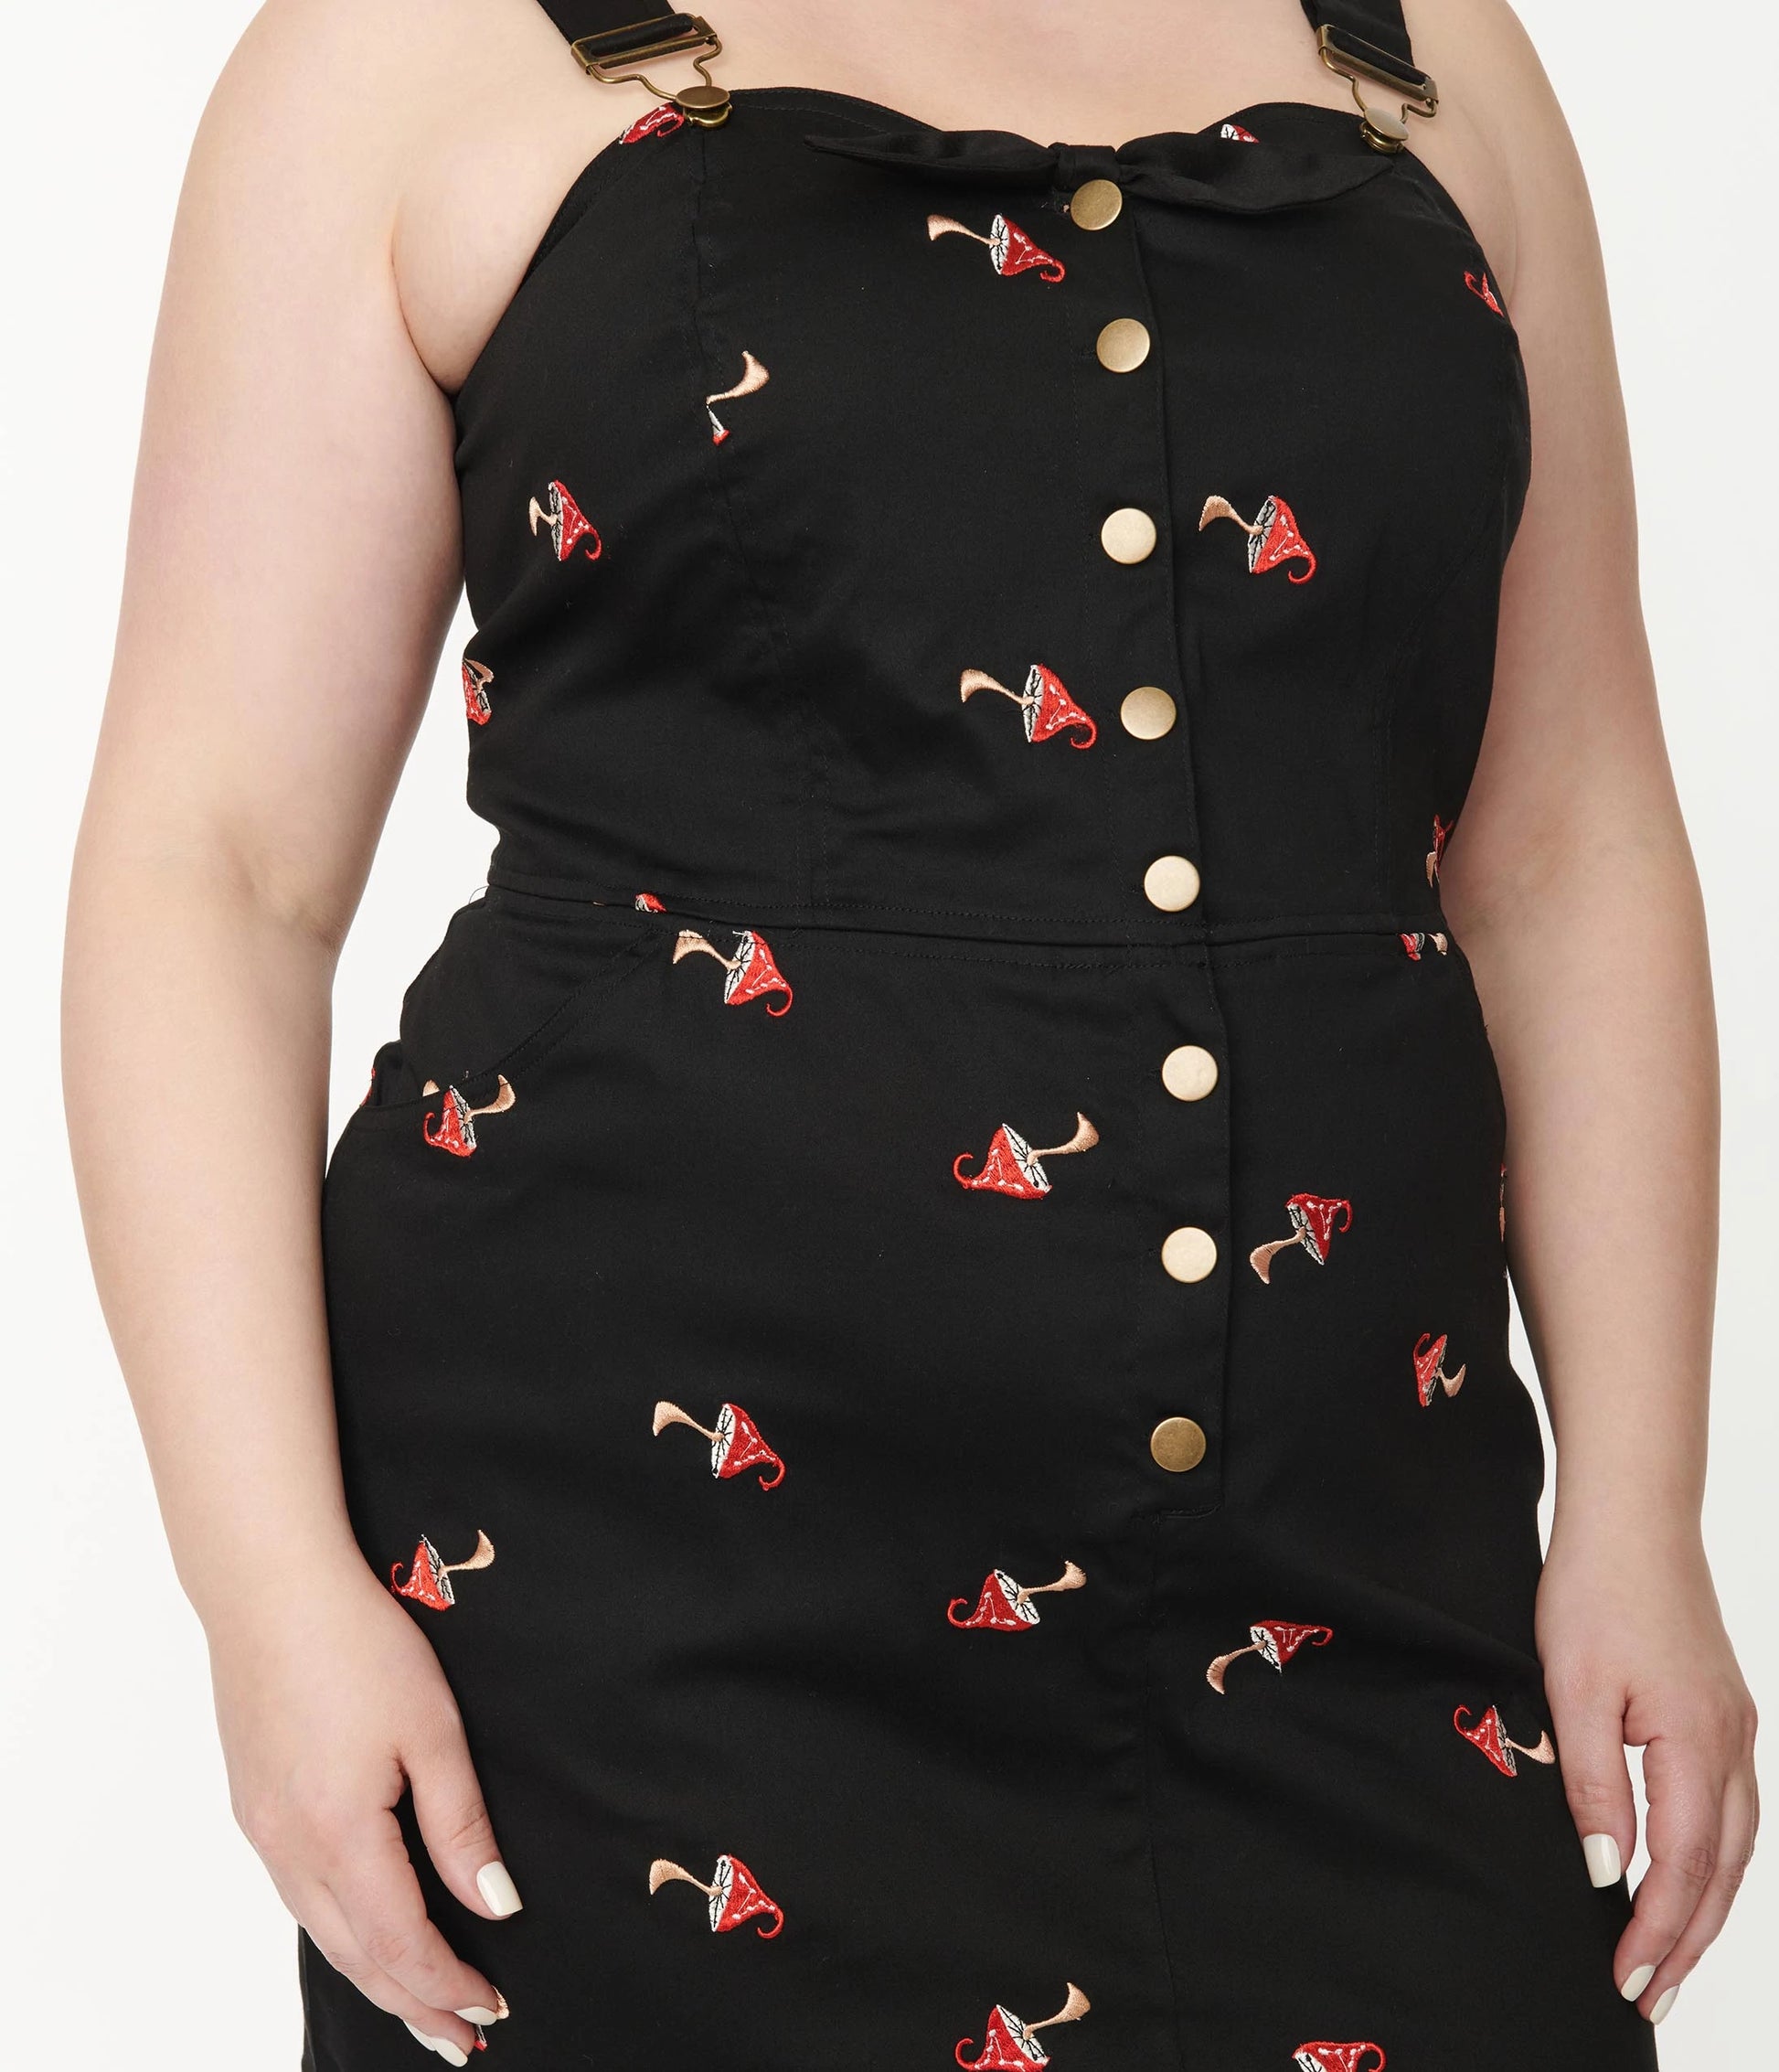 Close up of the button front black denim pinafore dress featuring embroidered red and white mushrooms being worn by a plus size model and a plain white background behind.